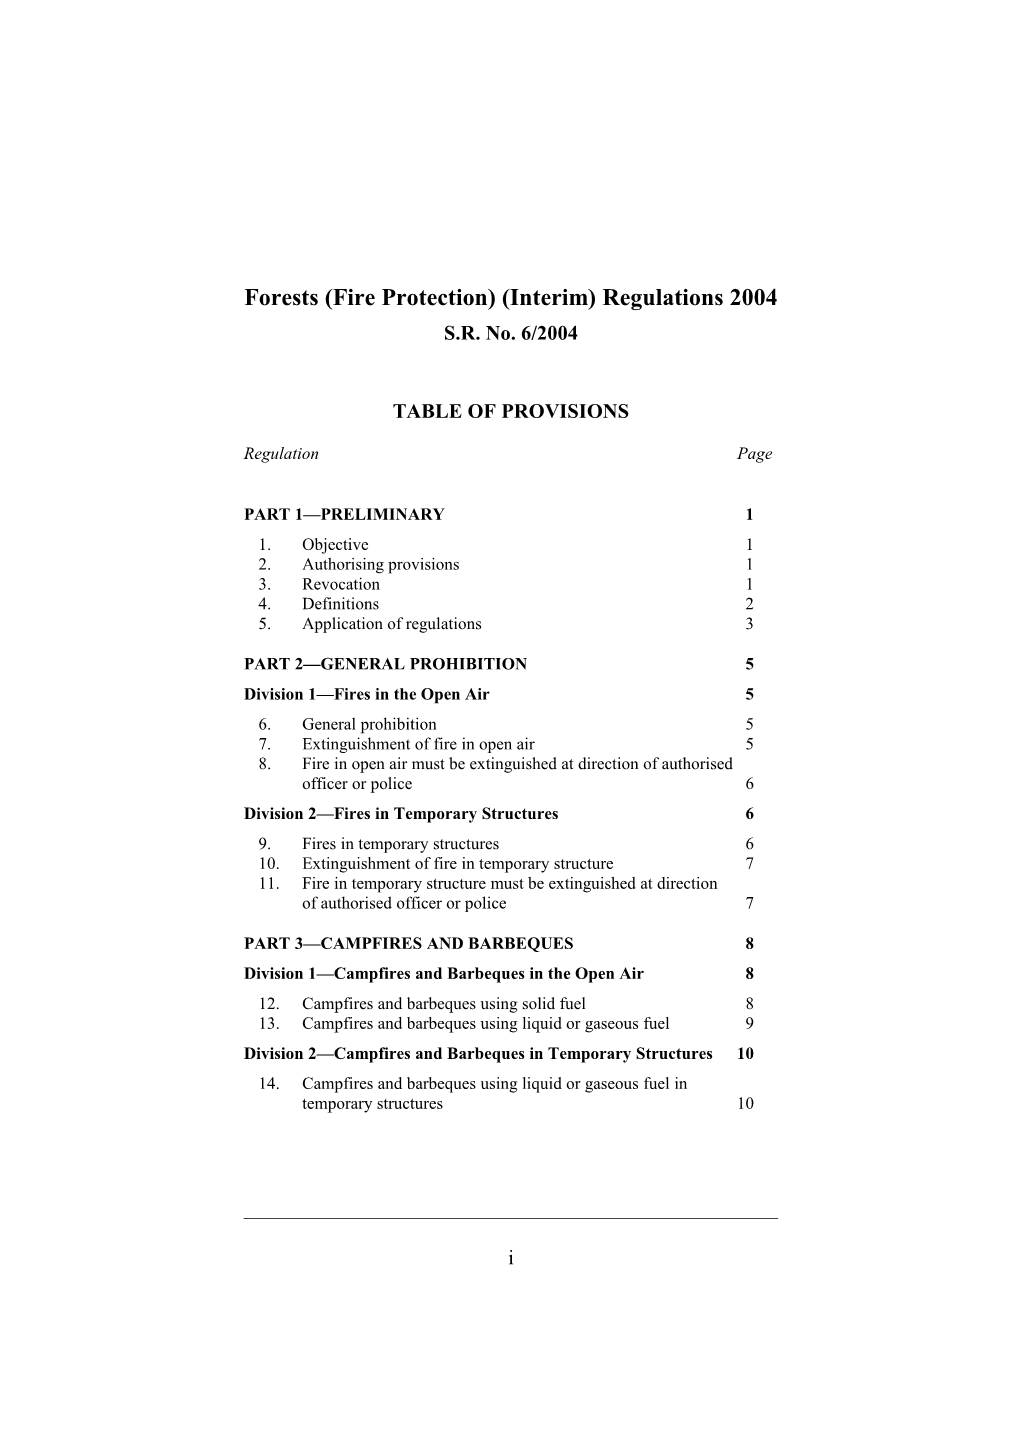 Forests (Fire Protection) (Interim) Regulations 2004